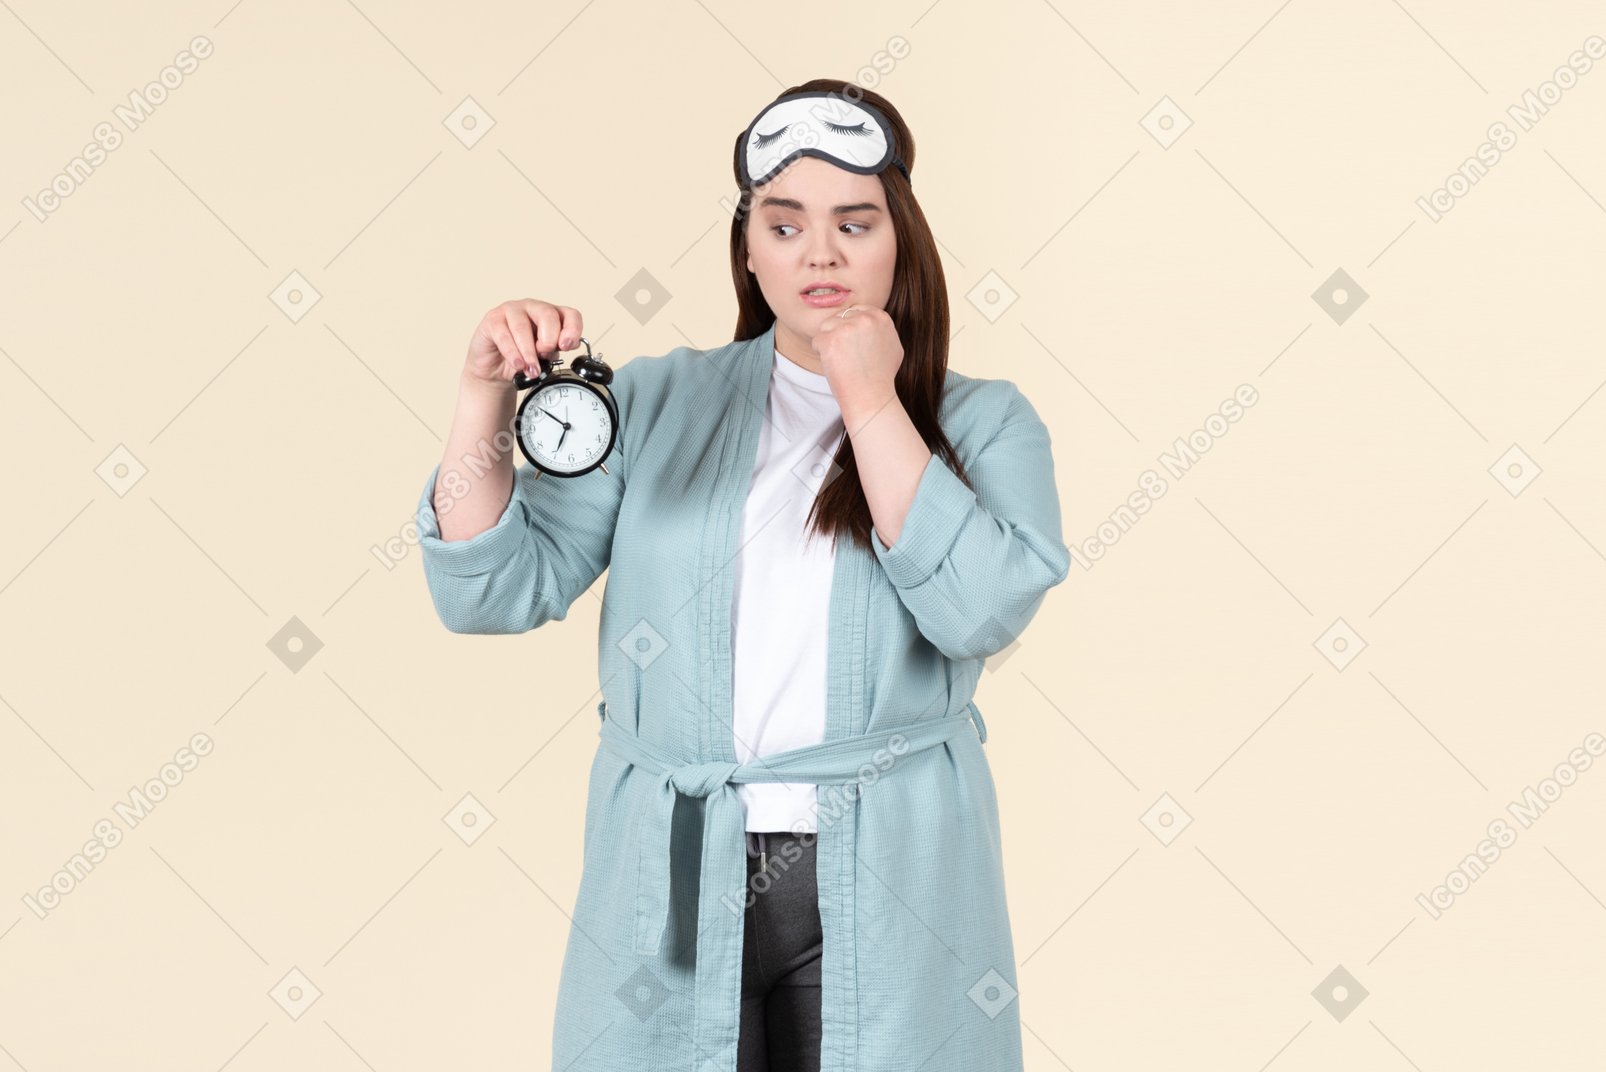 Young plus size woman in a blue bathrobe and a sleep mask on standing against a pastel yellow background, after just waking up